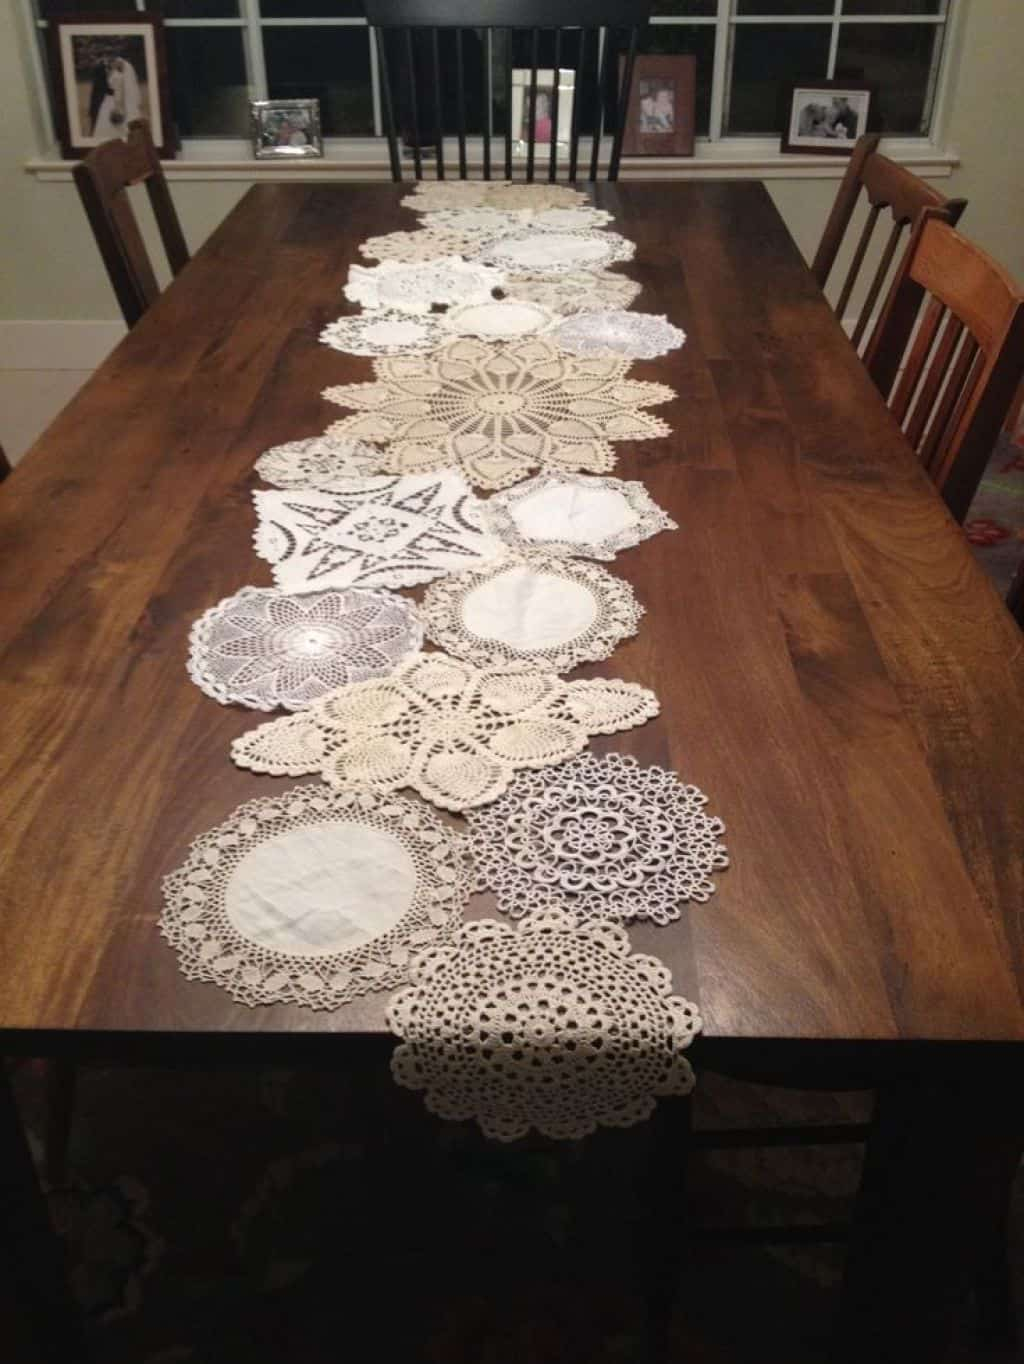 Crochet Table Runner Patterns Dining Room With Rectangular Dining Table And Crochet Table Runner